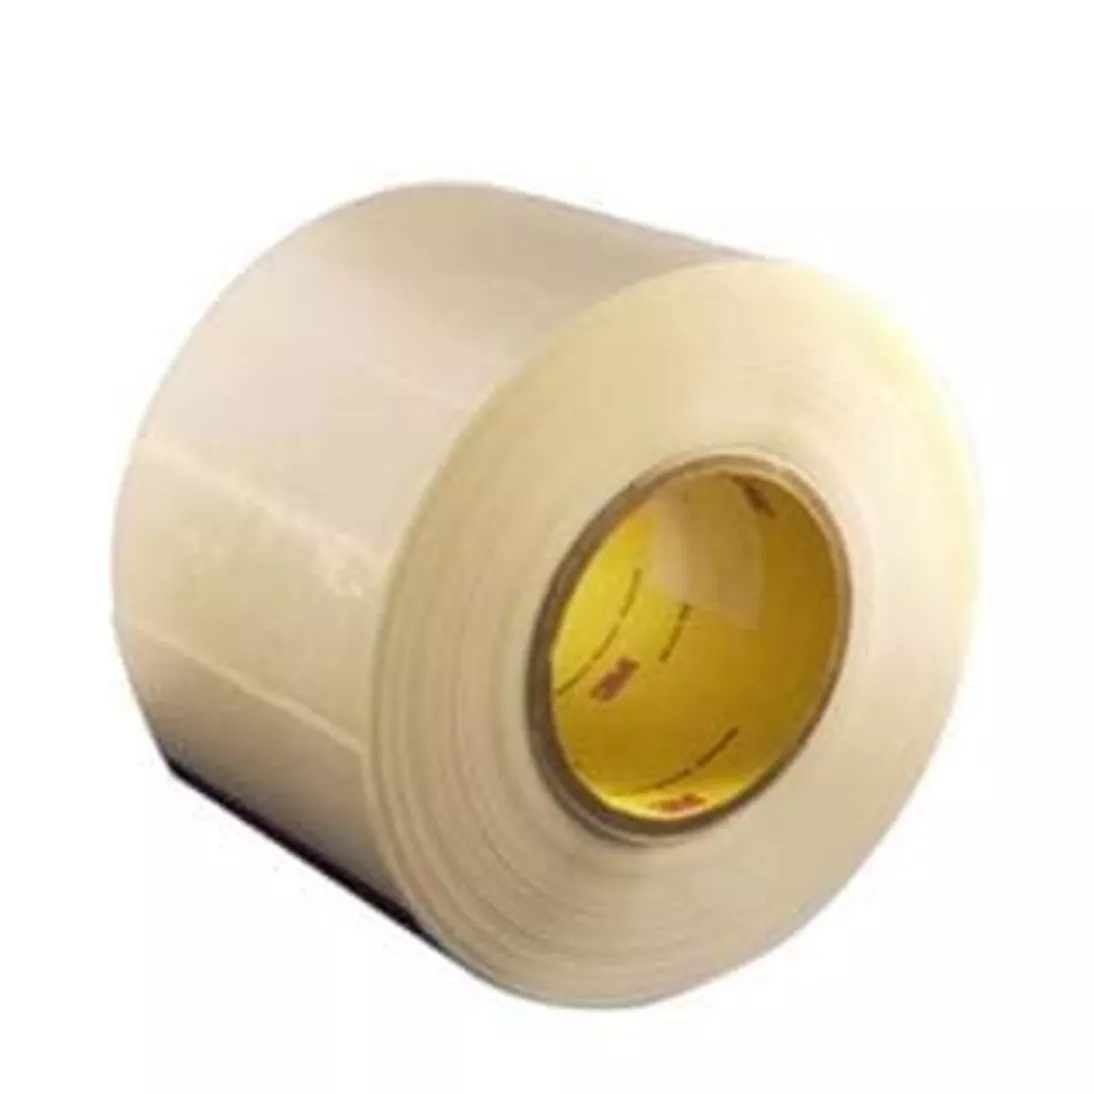 3M™ Polyurethane Protective Tape 8673, Transparent 2 in x 36 yd